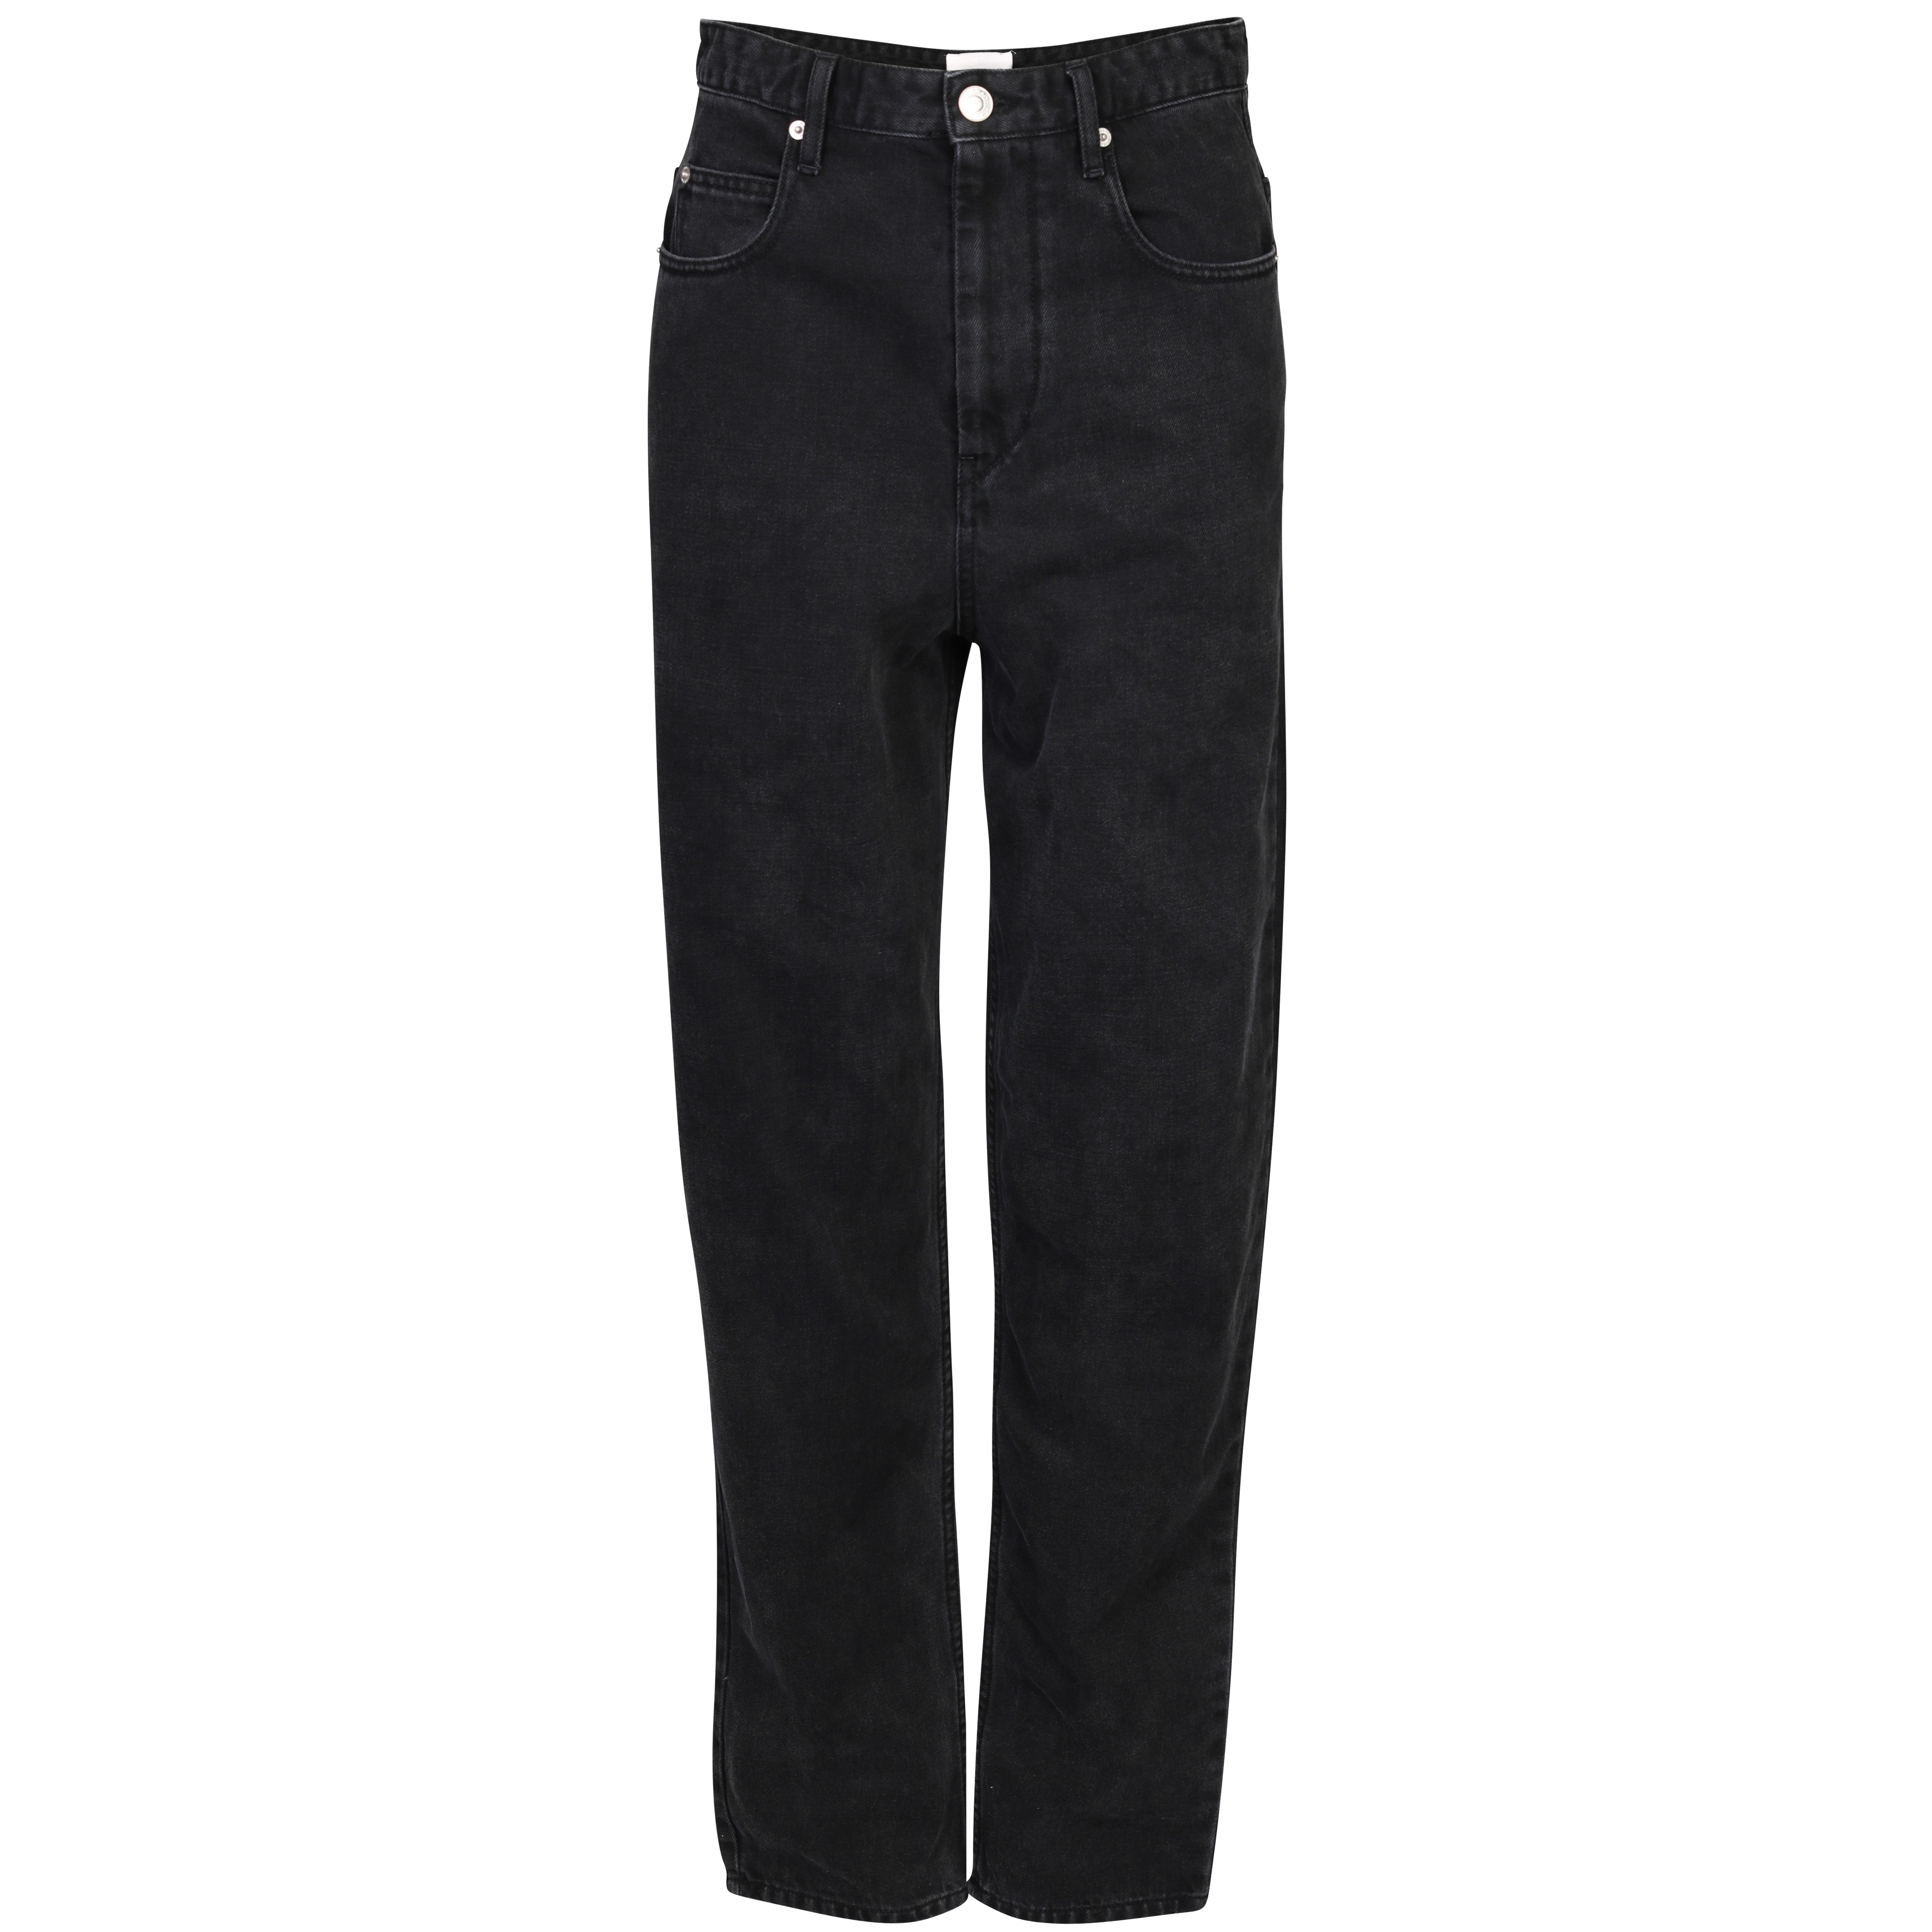 Isabel Marant Étoile Corsy Jeans in Faded Black